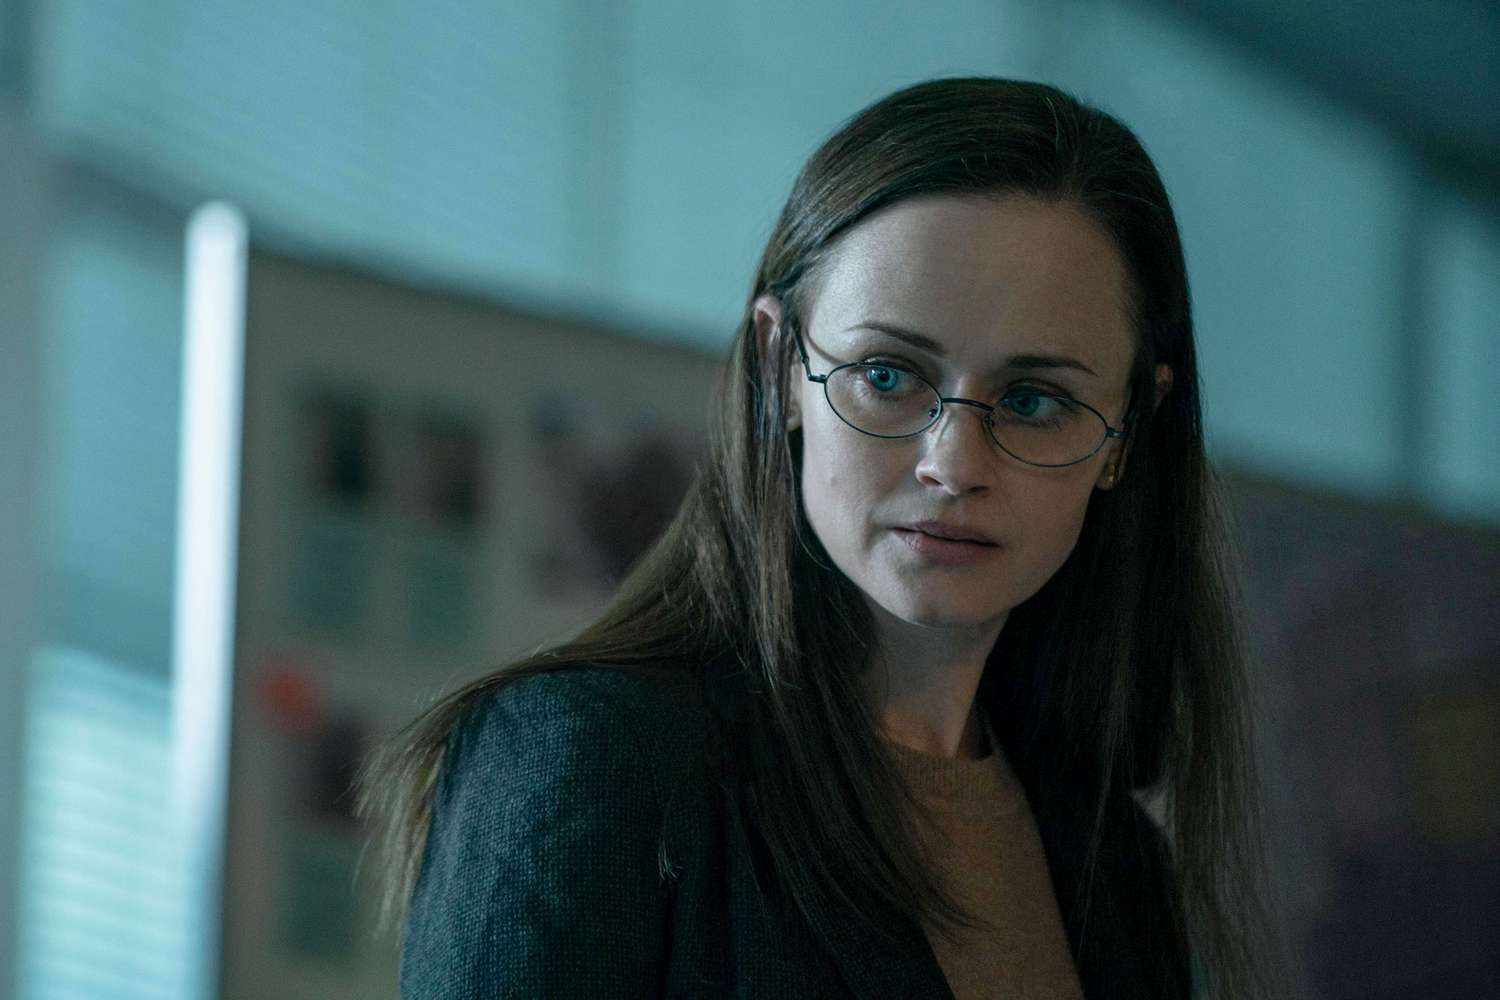 THE HANDMAID'S TALE, Alexis Bledel, 'Nightshade', (Season 4, ep. 402, aired Apr. 28, 2021